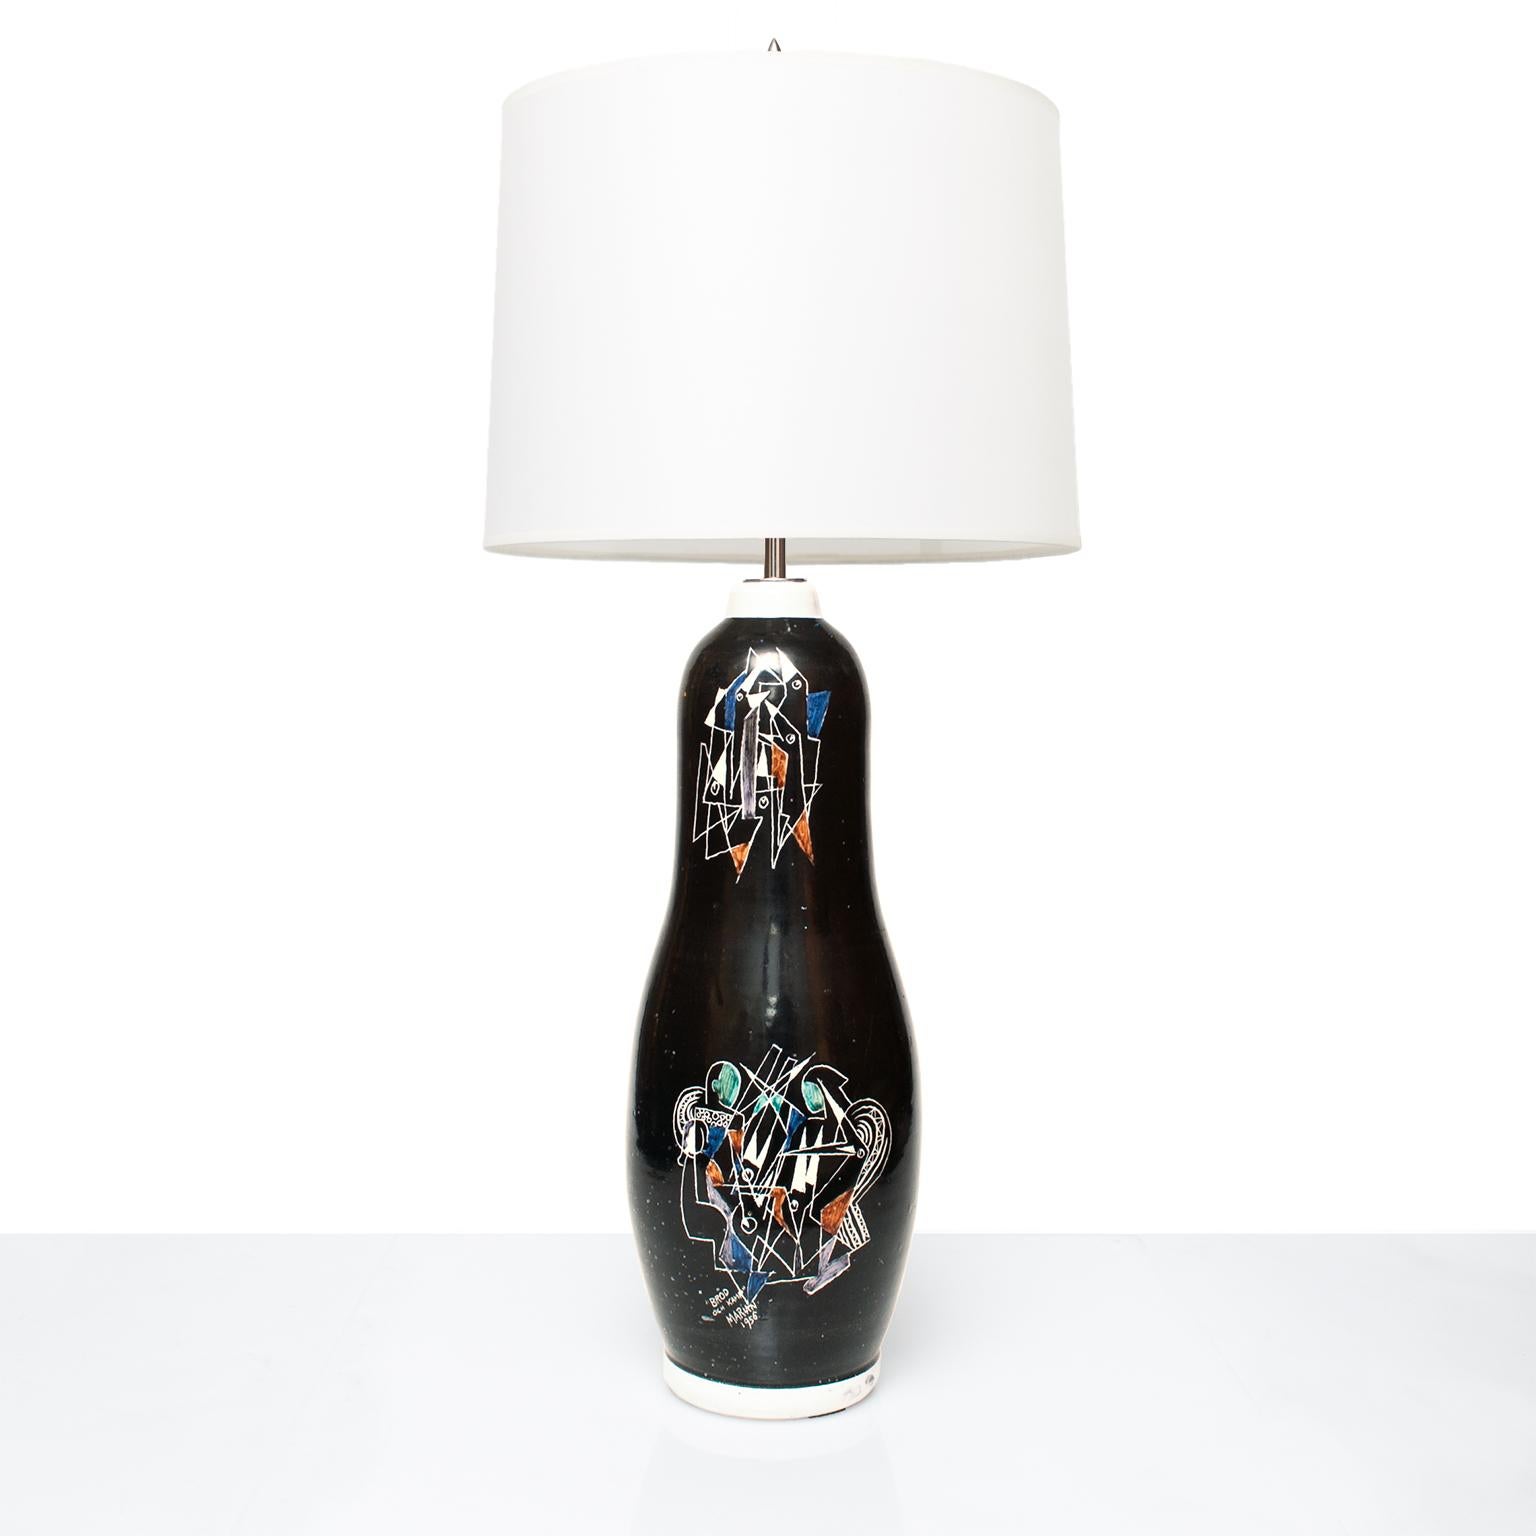 A Scandinavian Modern tall ceramic lamp by Marian Zawadzki for Tilgmans Keramik. The lamp's body is a black glaze which is hand decorated with 2 scenes depicting birds feeding their young in a nest. Signed 